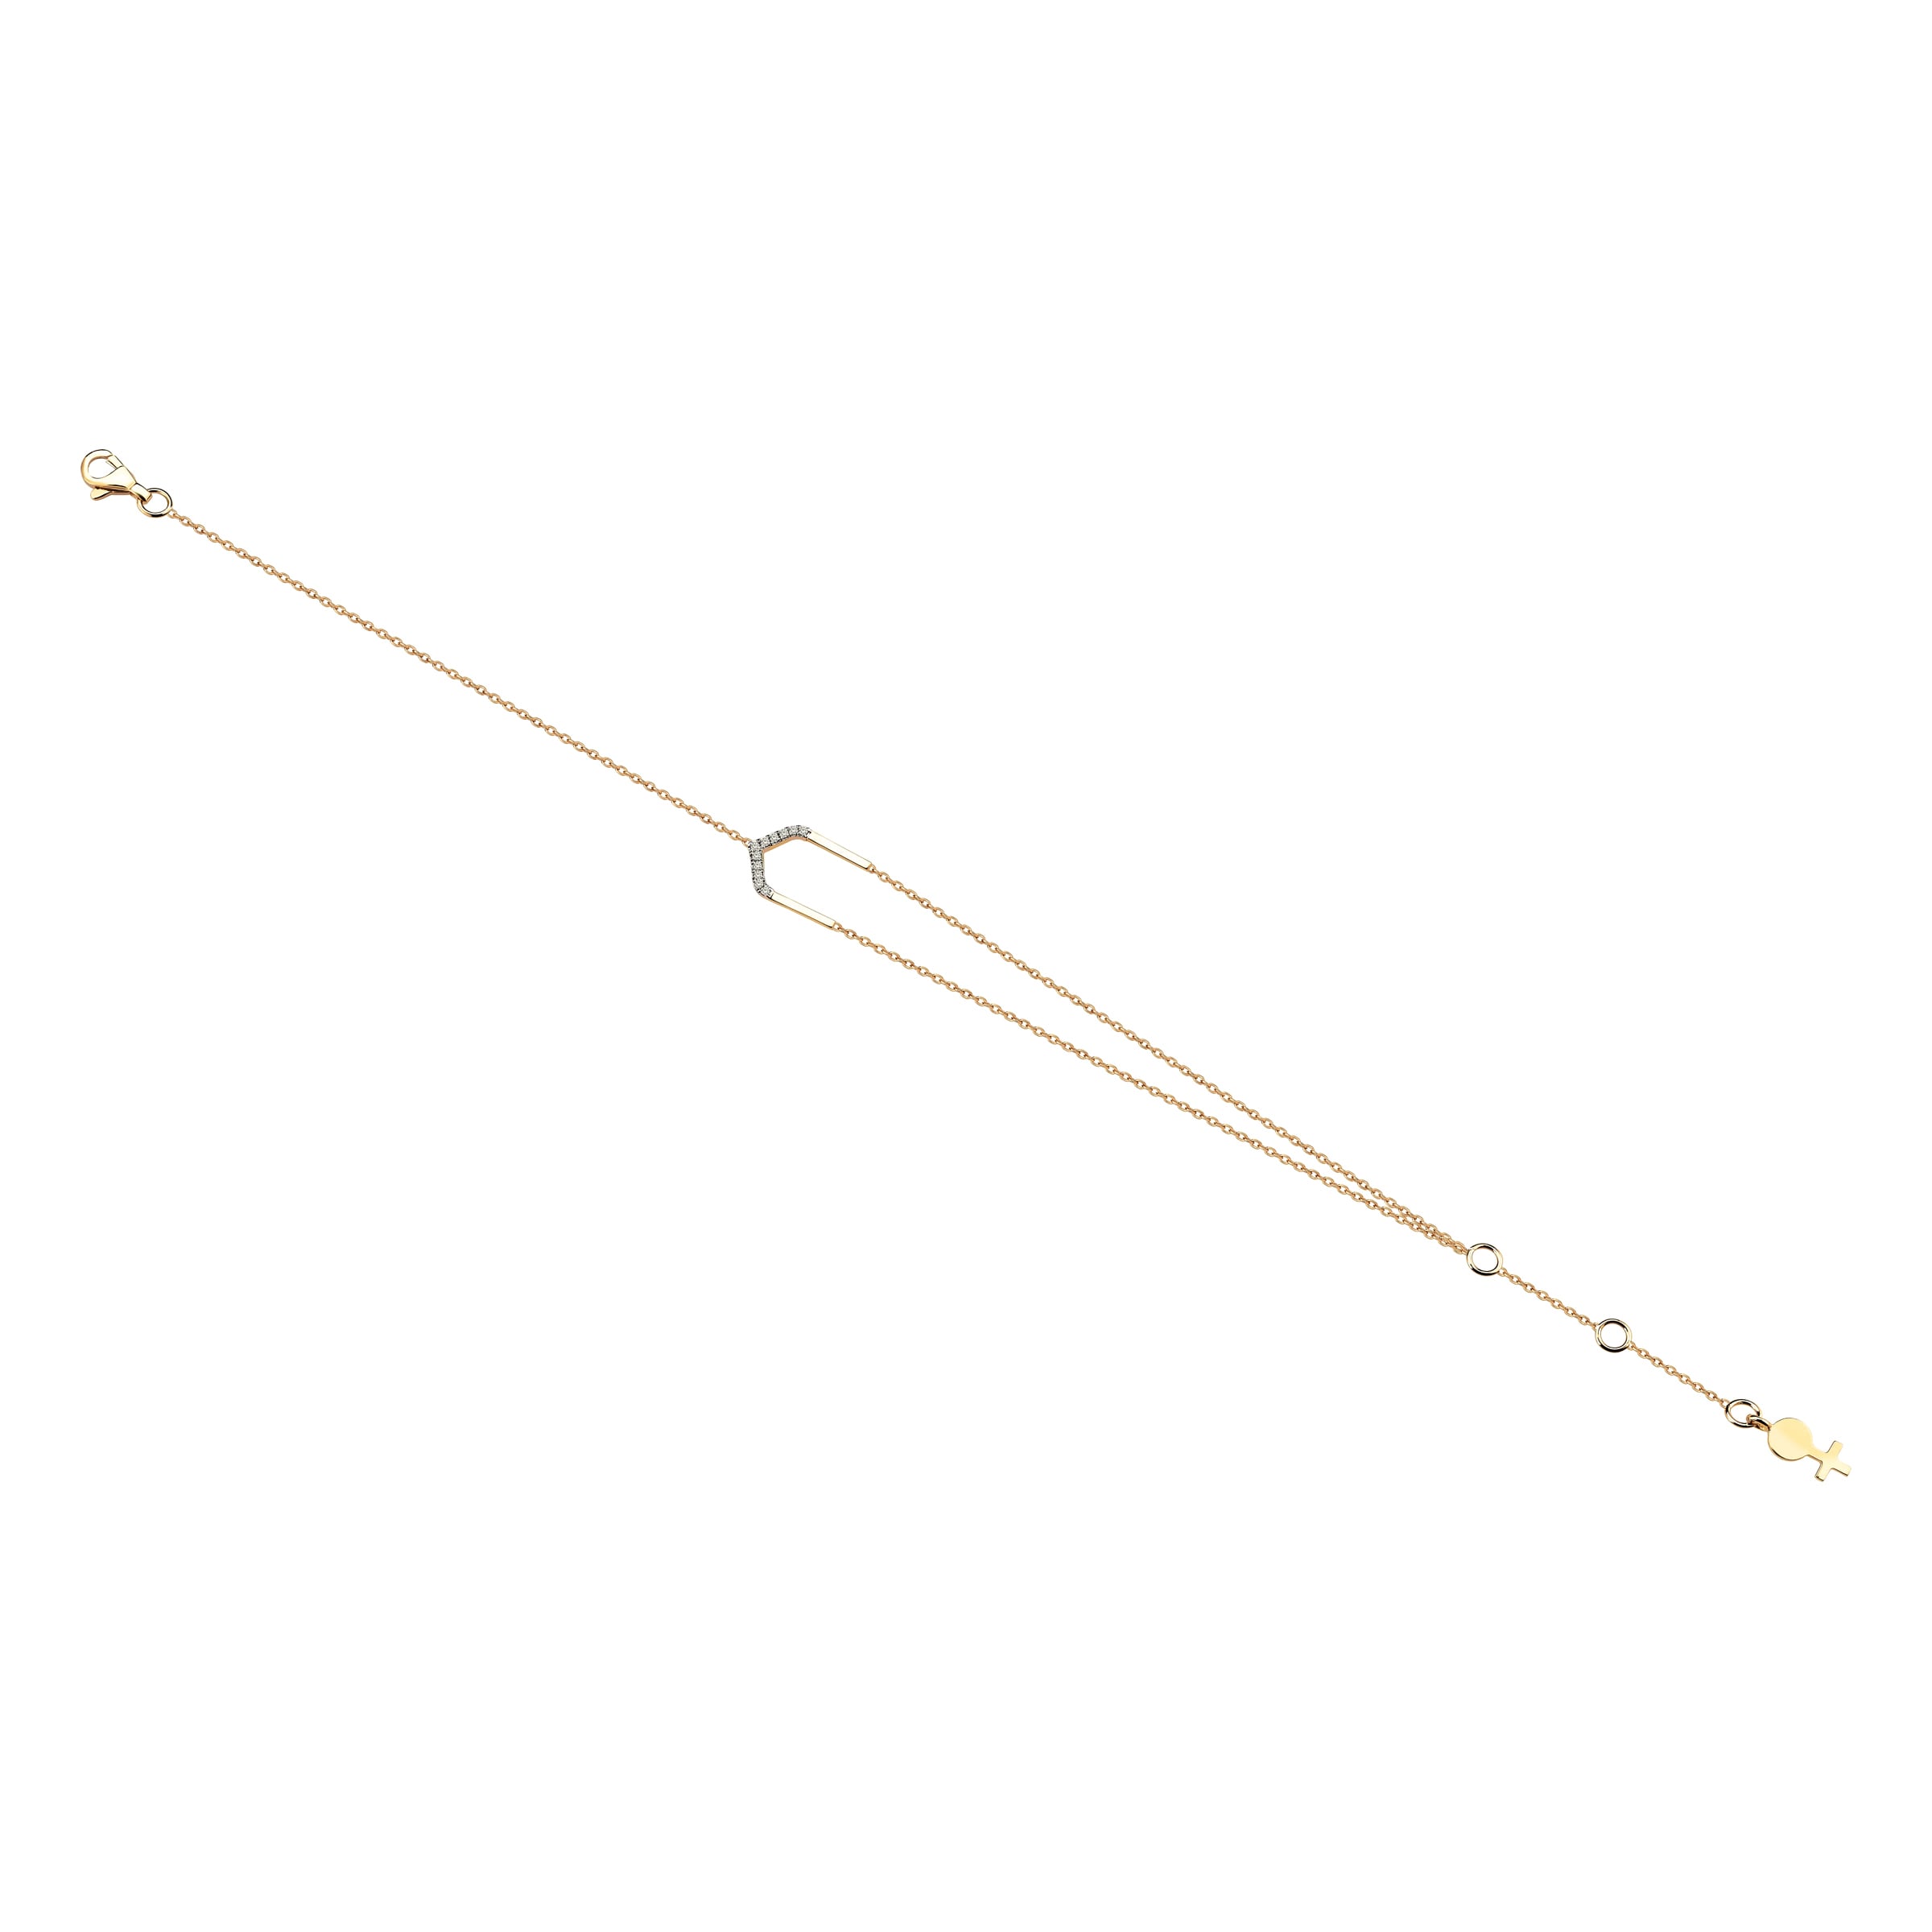 Four Centered Arch Anklet in Yellow Gold - Her Story Shop